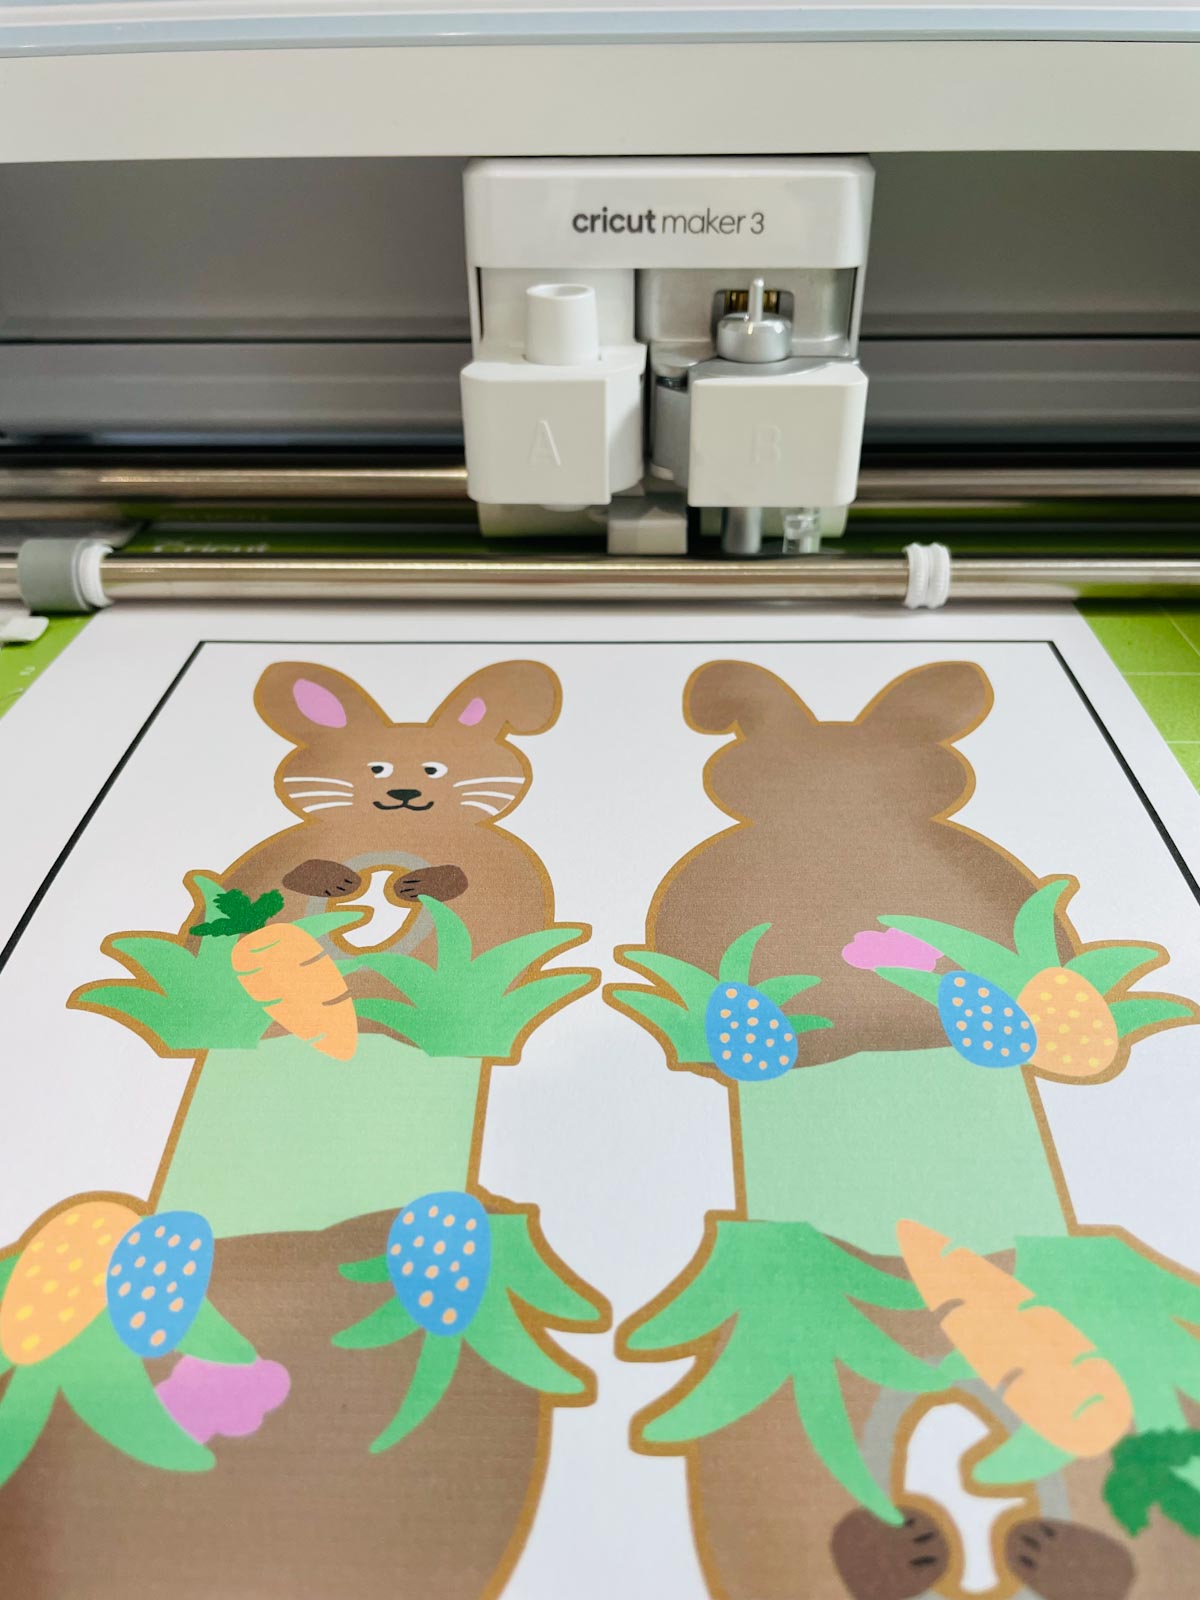 How to print and cut with Cricut